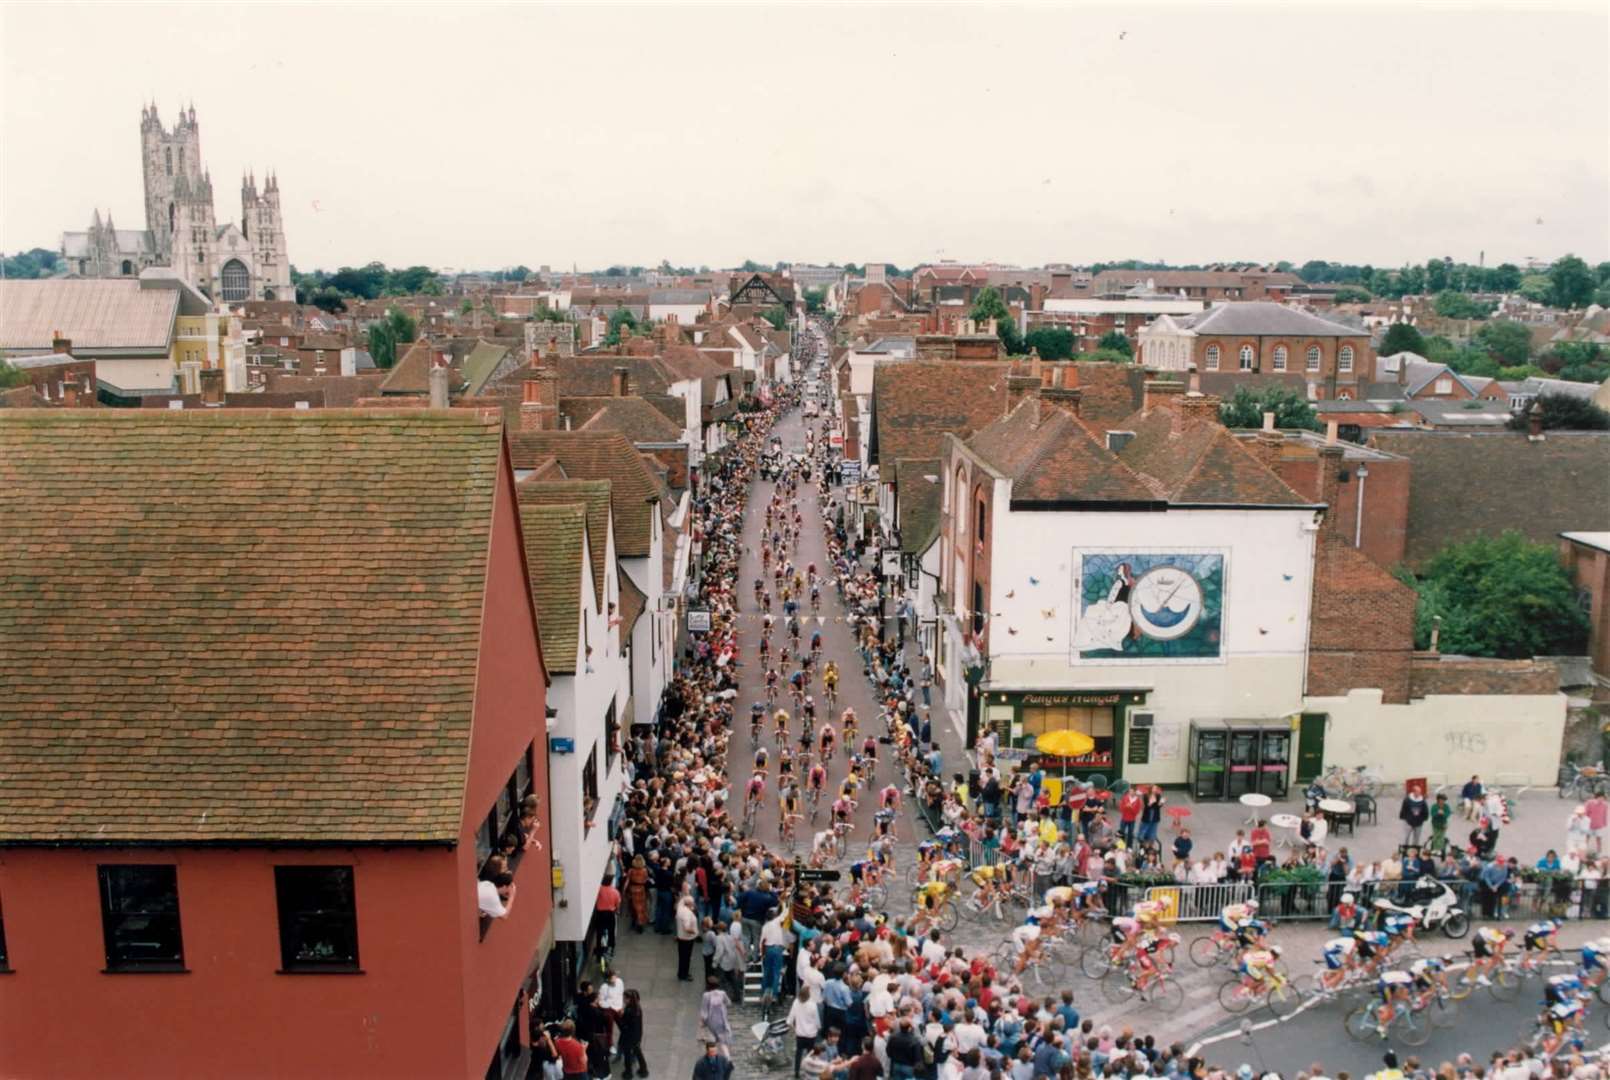 For the first time in its history, the Tour De France came to Kent in 1994. Stage four of the world's biggest sporting event saw riders set off in Dover and end in Brighton. Here, the riders are pictured cycling through Canterbury's city centre... picture taken from Westgate Towers